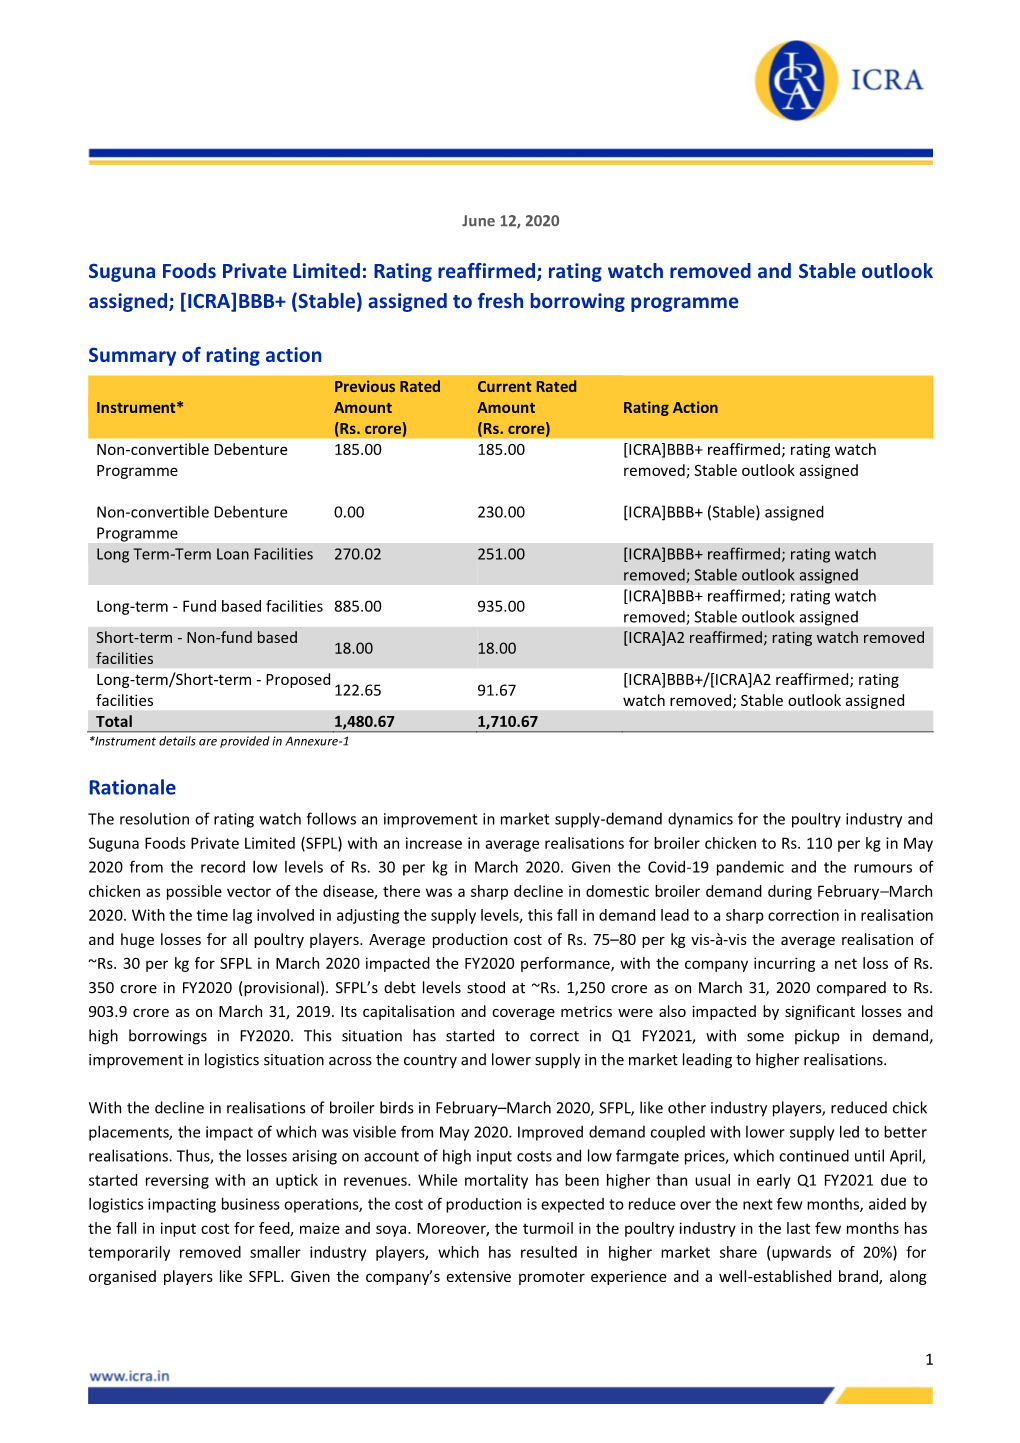 Suguna Foods Private Limited: Rating Reaffirmed; Rating Watch Removed and Stable Outlook Assigned; [ICRA]BBB+ (Stable) Assigned to Fresh Borrowing Programme